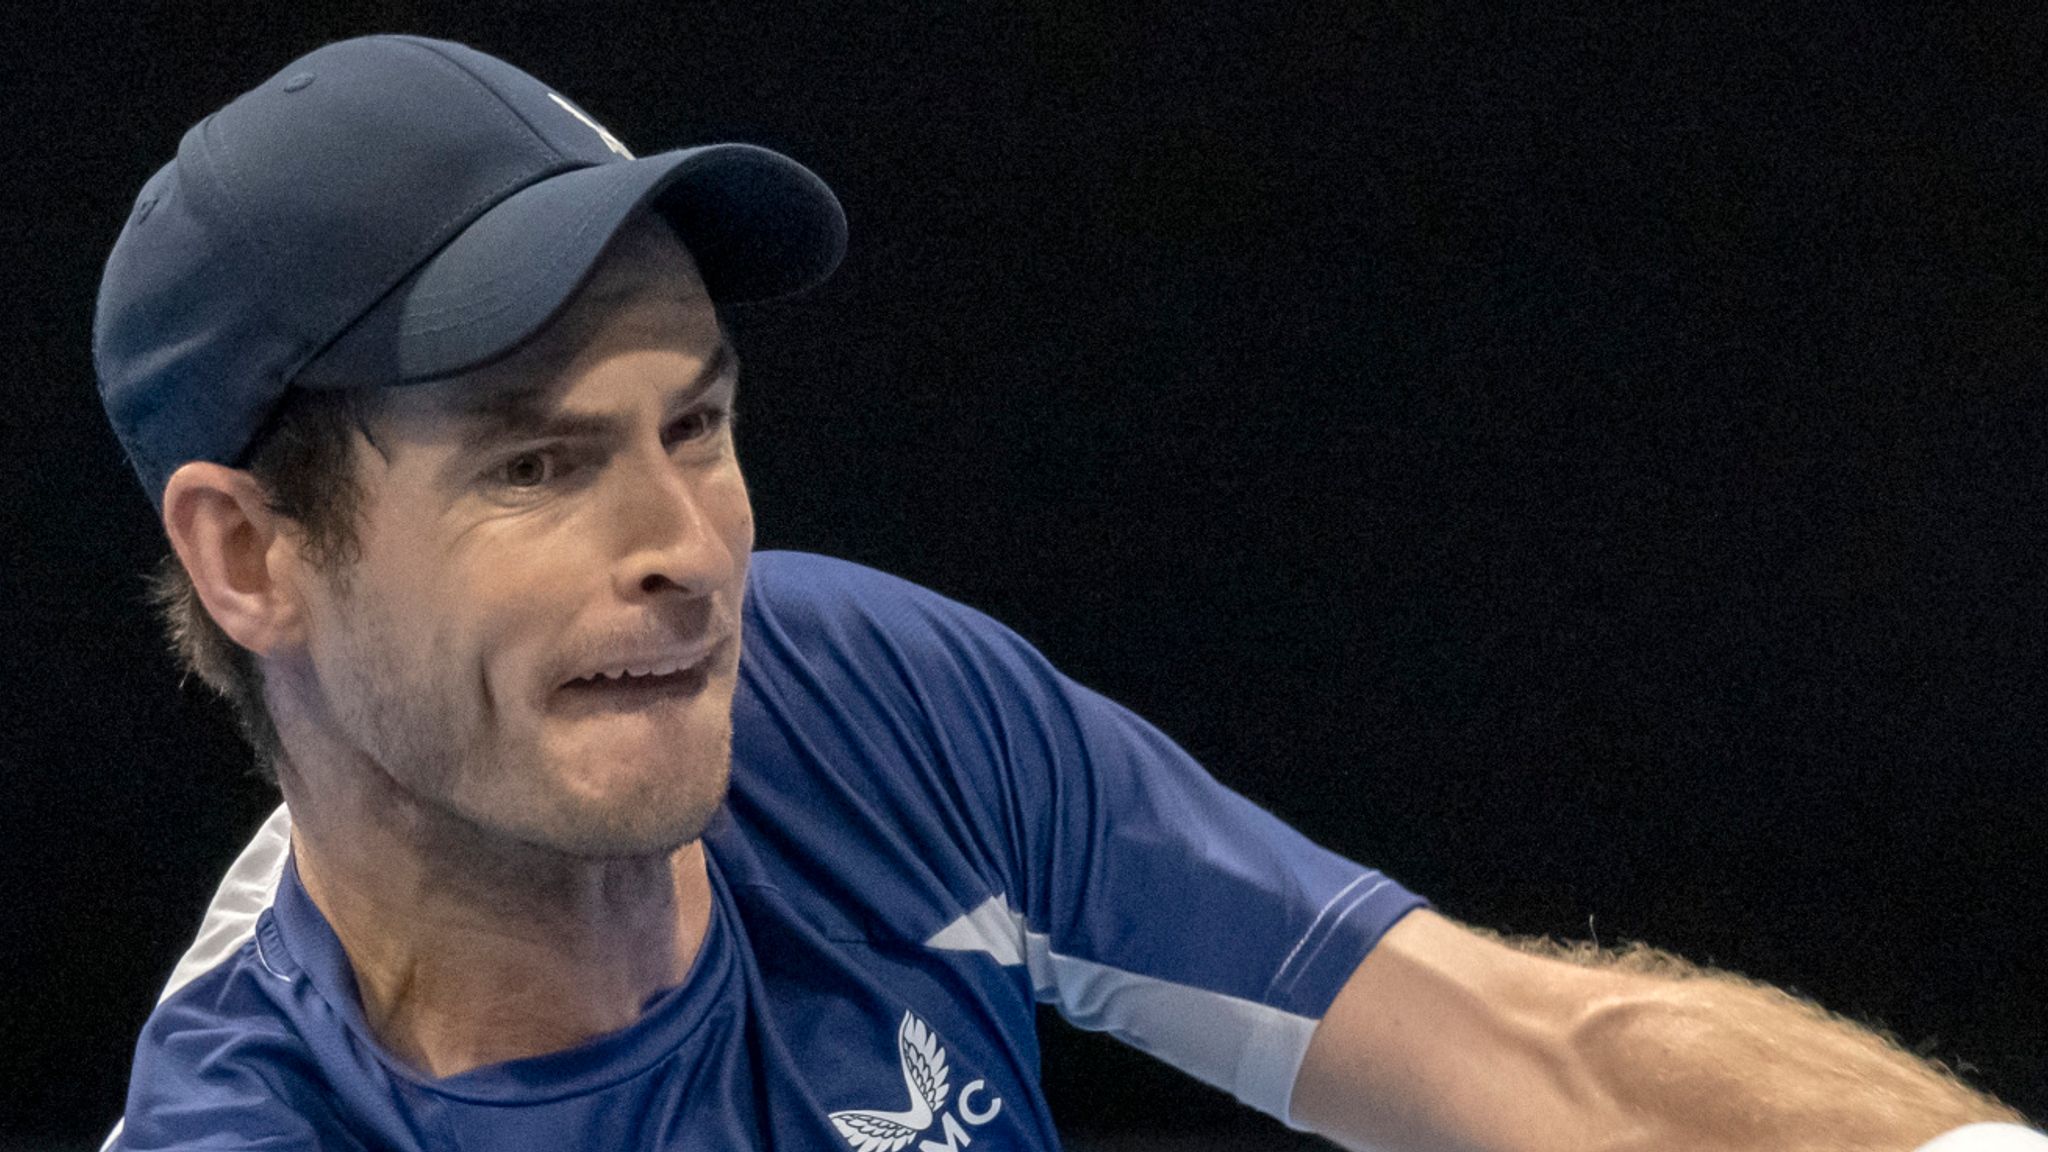 ATP Tour Andy Murray out of Swiss Indoors after straight sets loss against Roberto Bautista Agut Tennis News Sky Sports